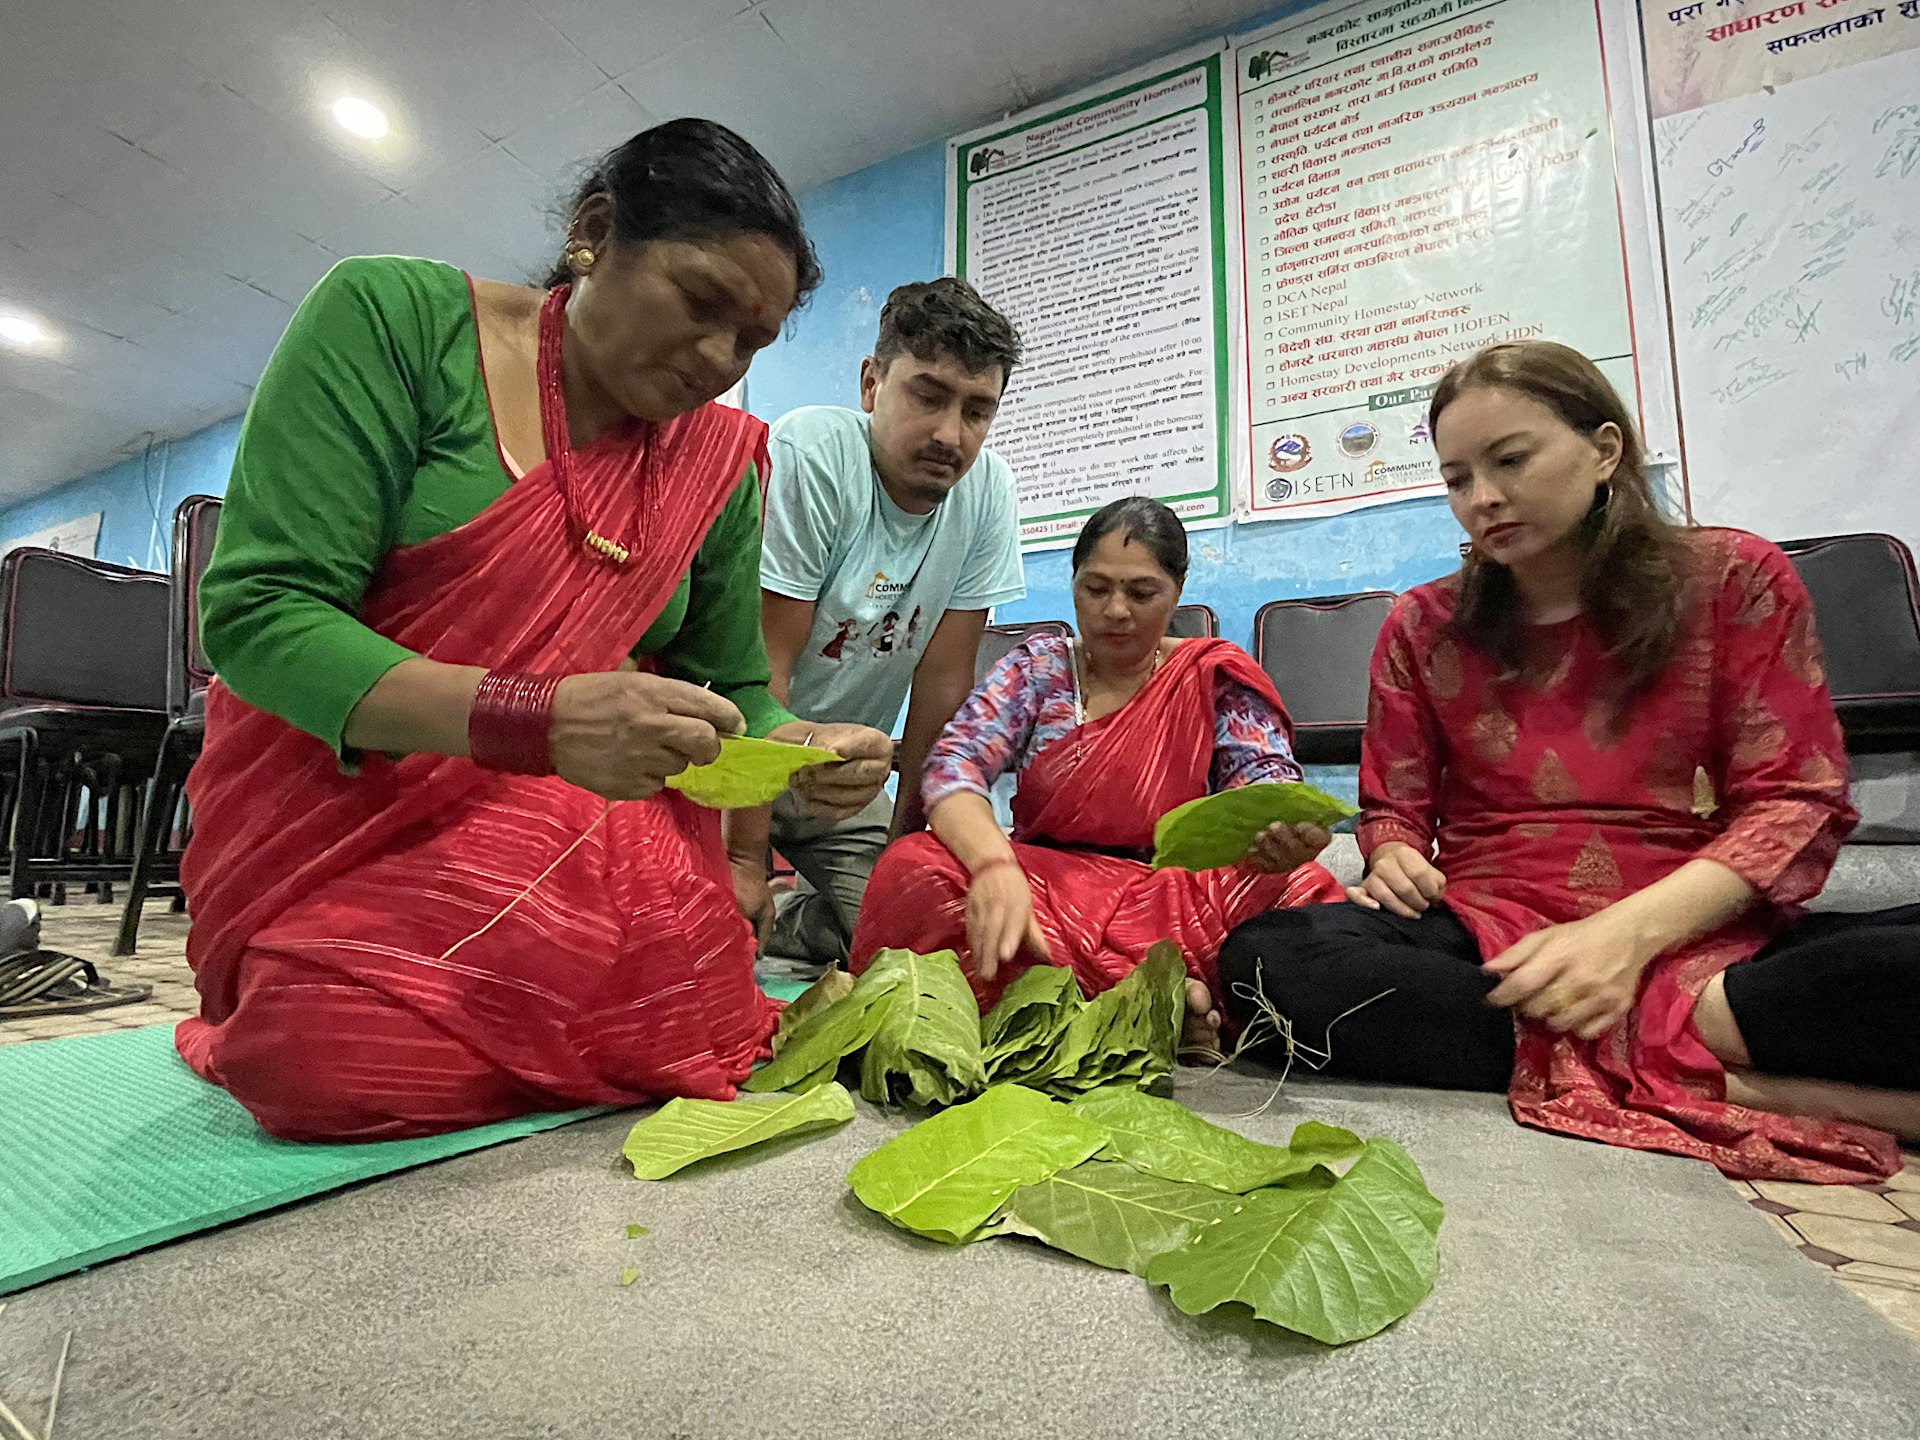 Two people demonstrate how to stitch together large green leaves to form a plate